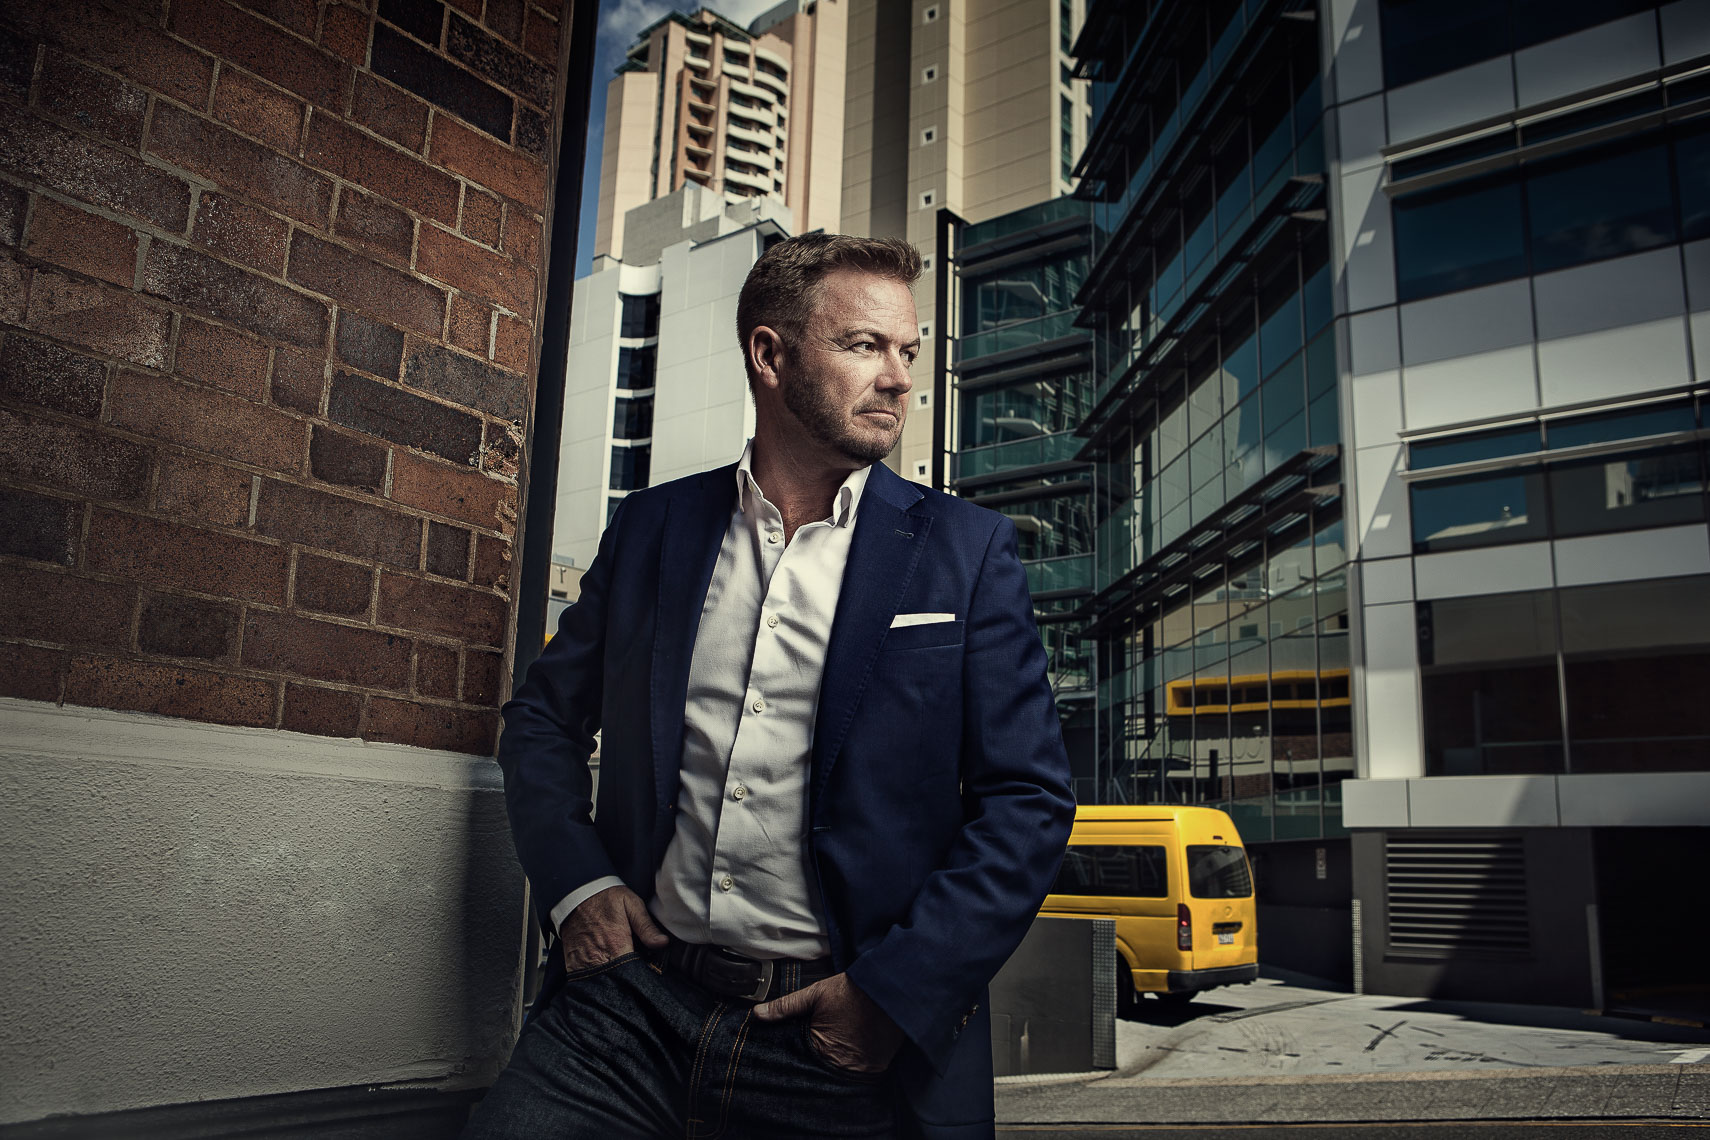 Corporate and annual report photography based in Brisbane